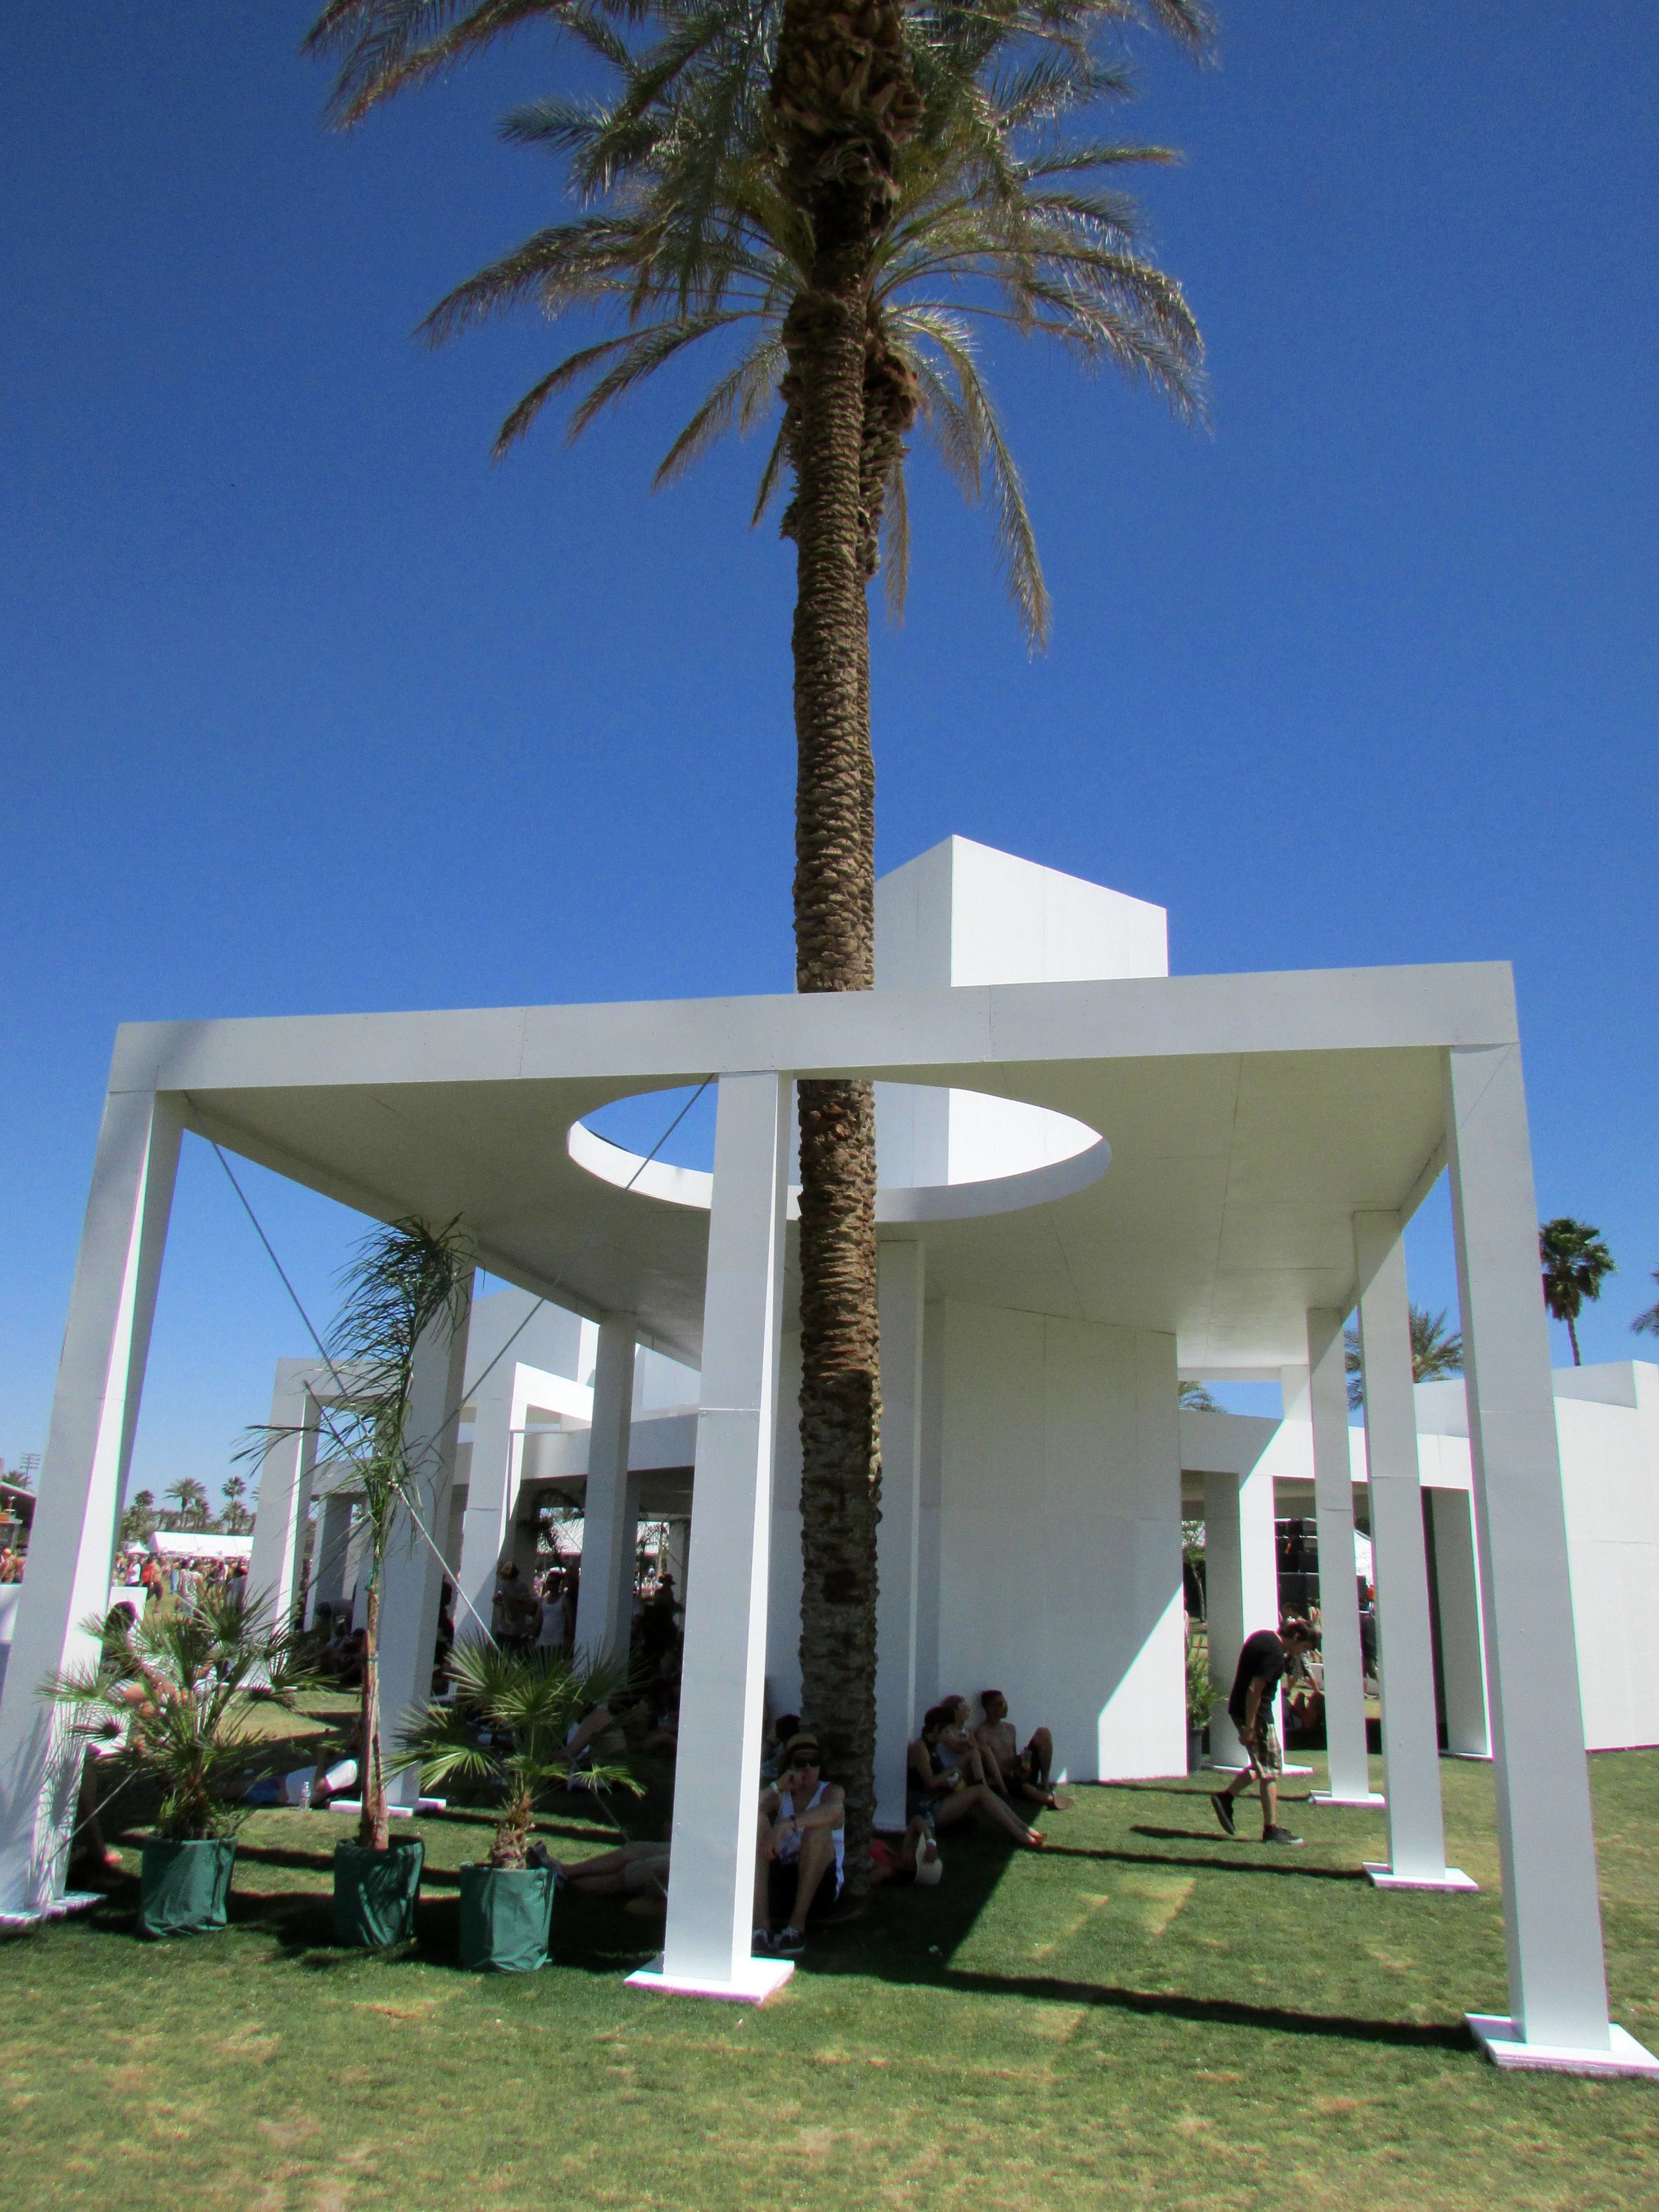 9 - The stately 'Mirage' sculpture, envoking the modernist archiectural style of mid-21st century Palms Springs homes.JPG